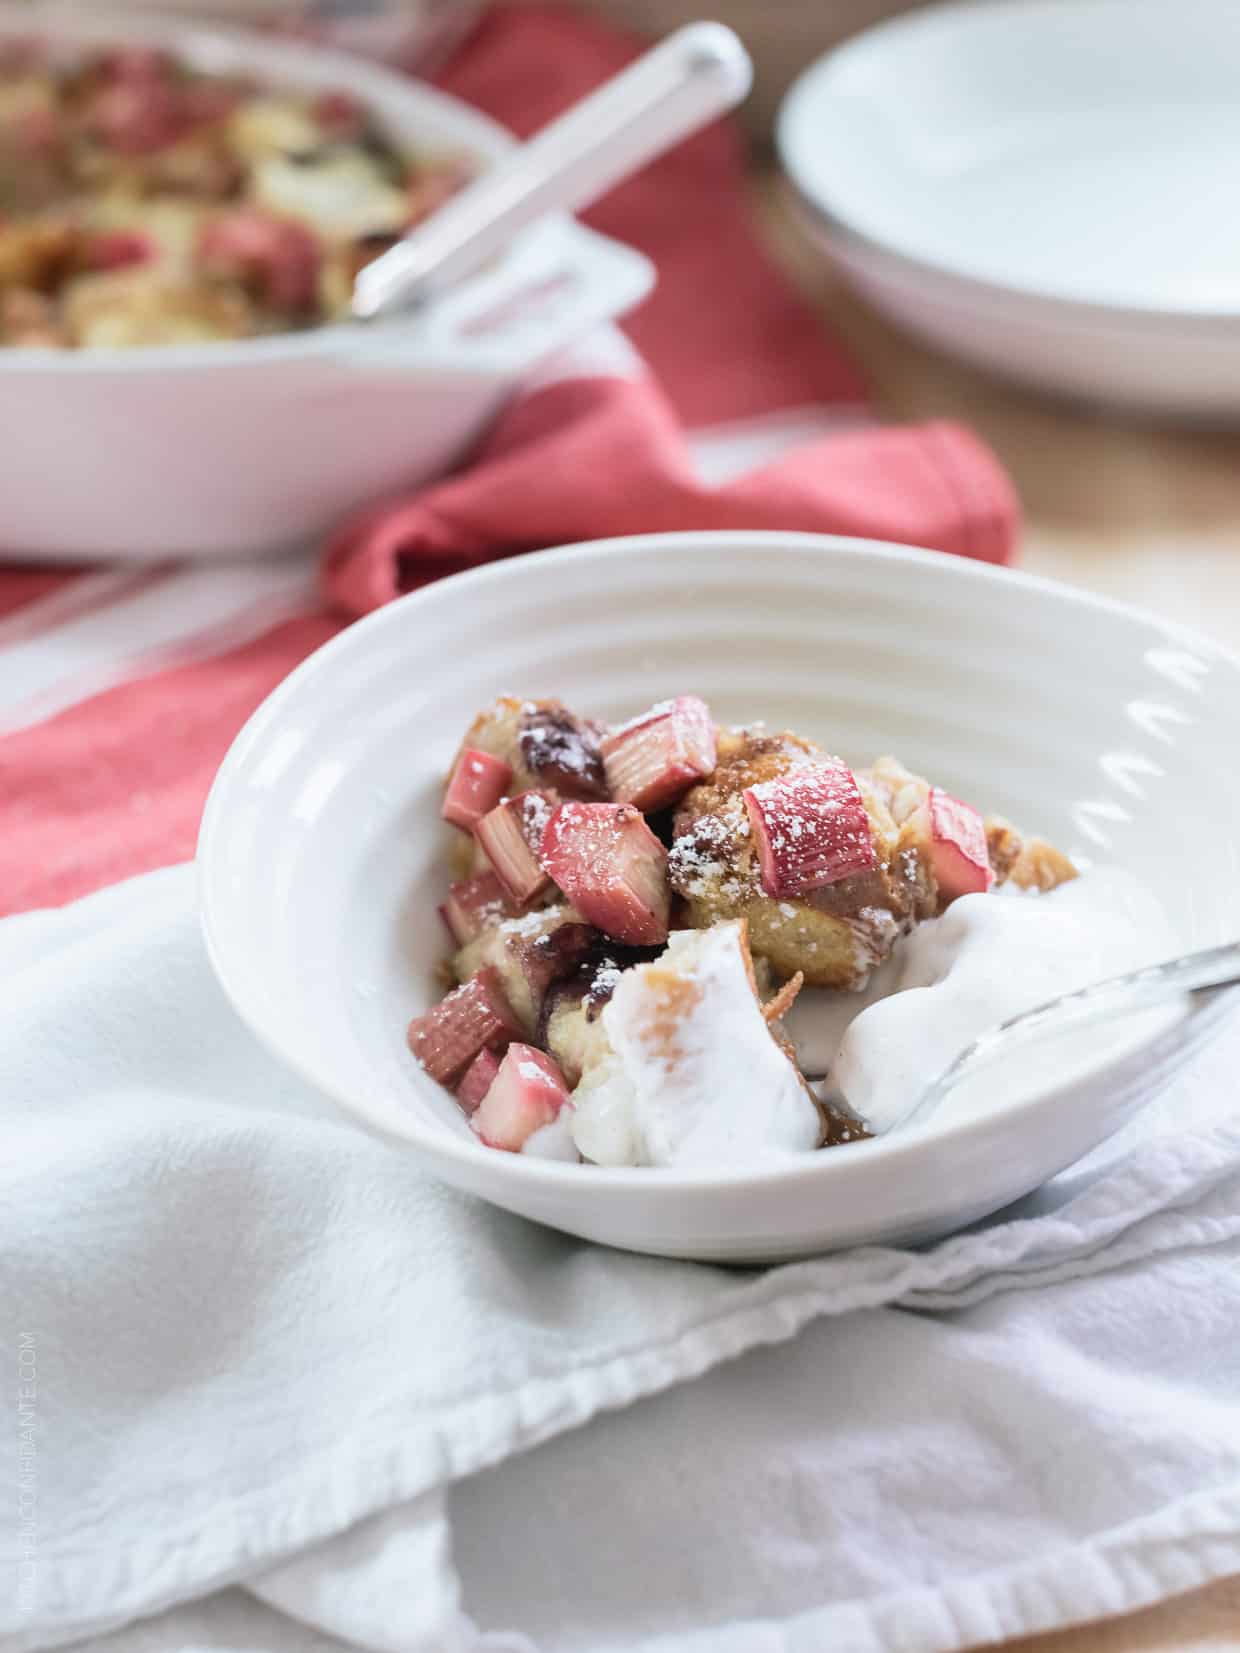 Rhubarb Bread Pudding in a white bowl topped with a scoop of vanilla ice cream.